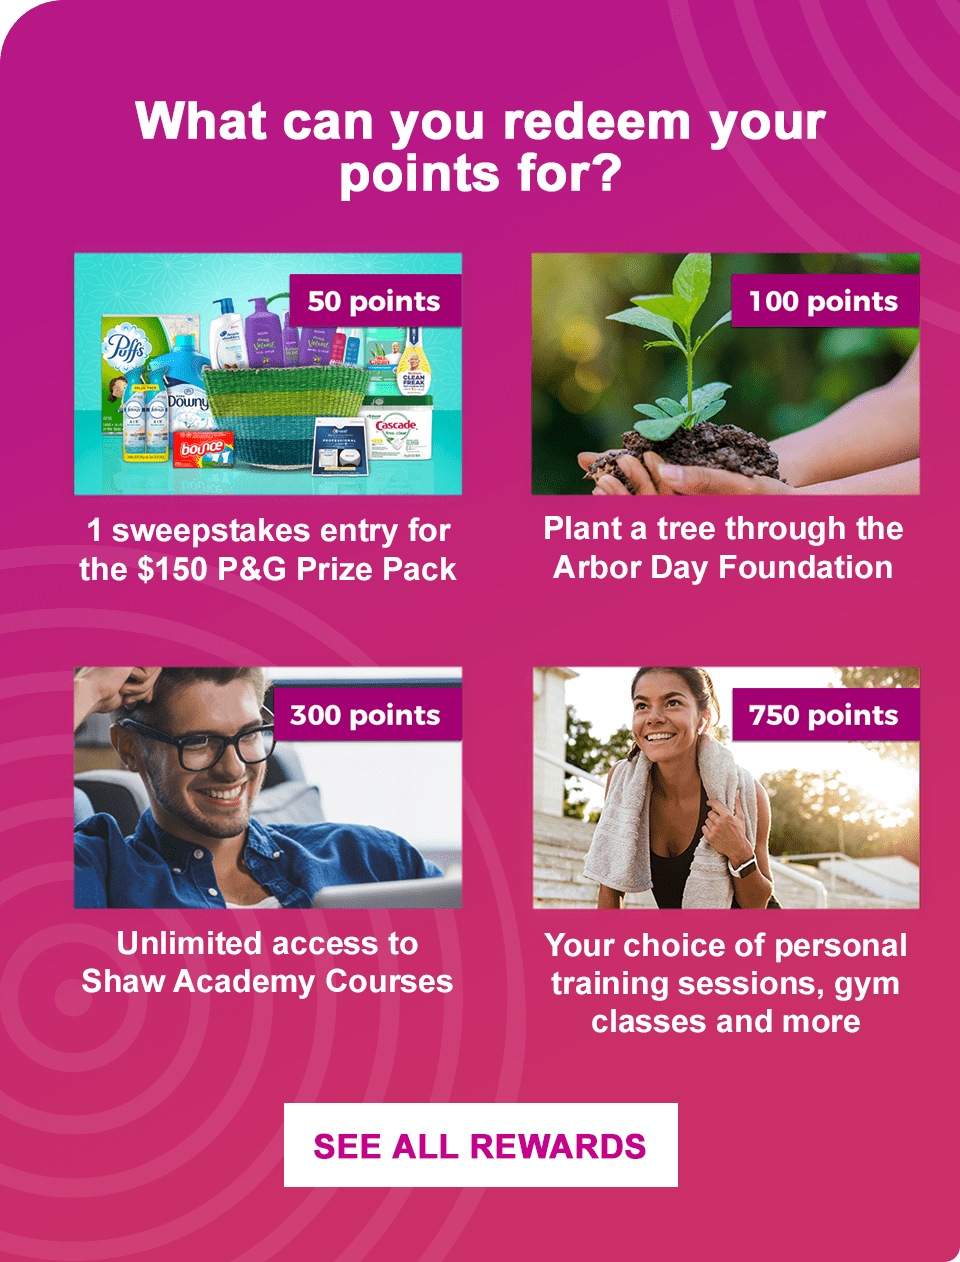 What can you redeem your points for?